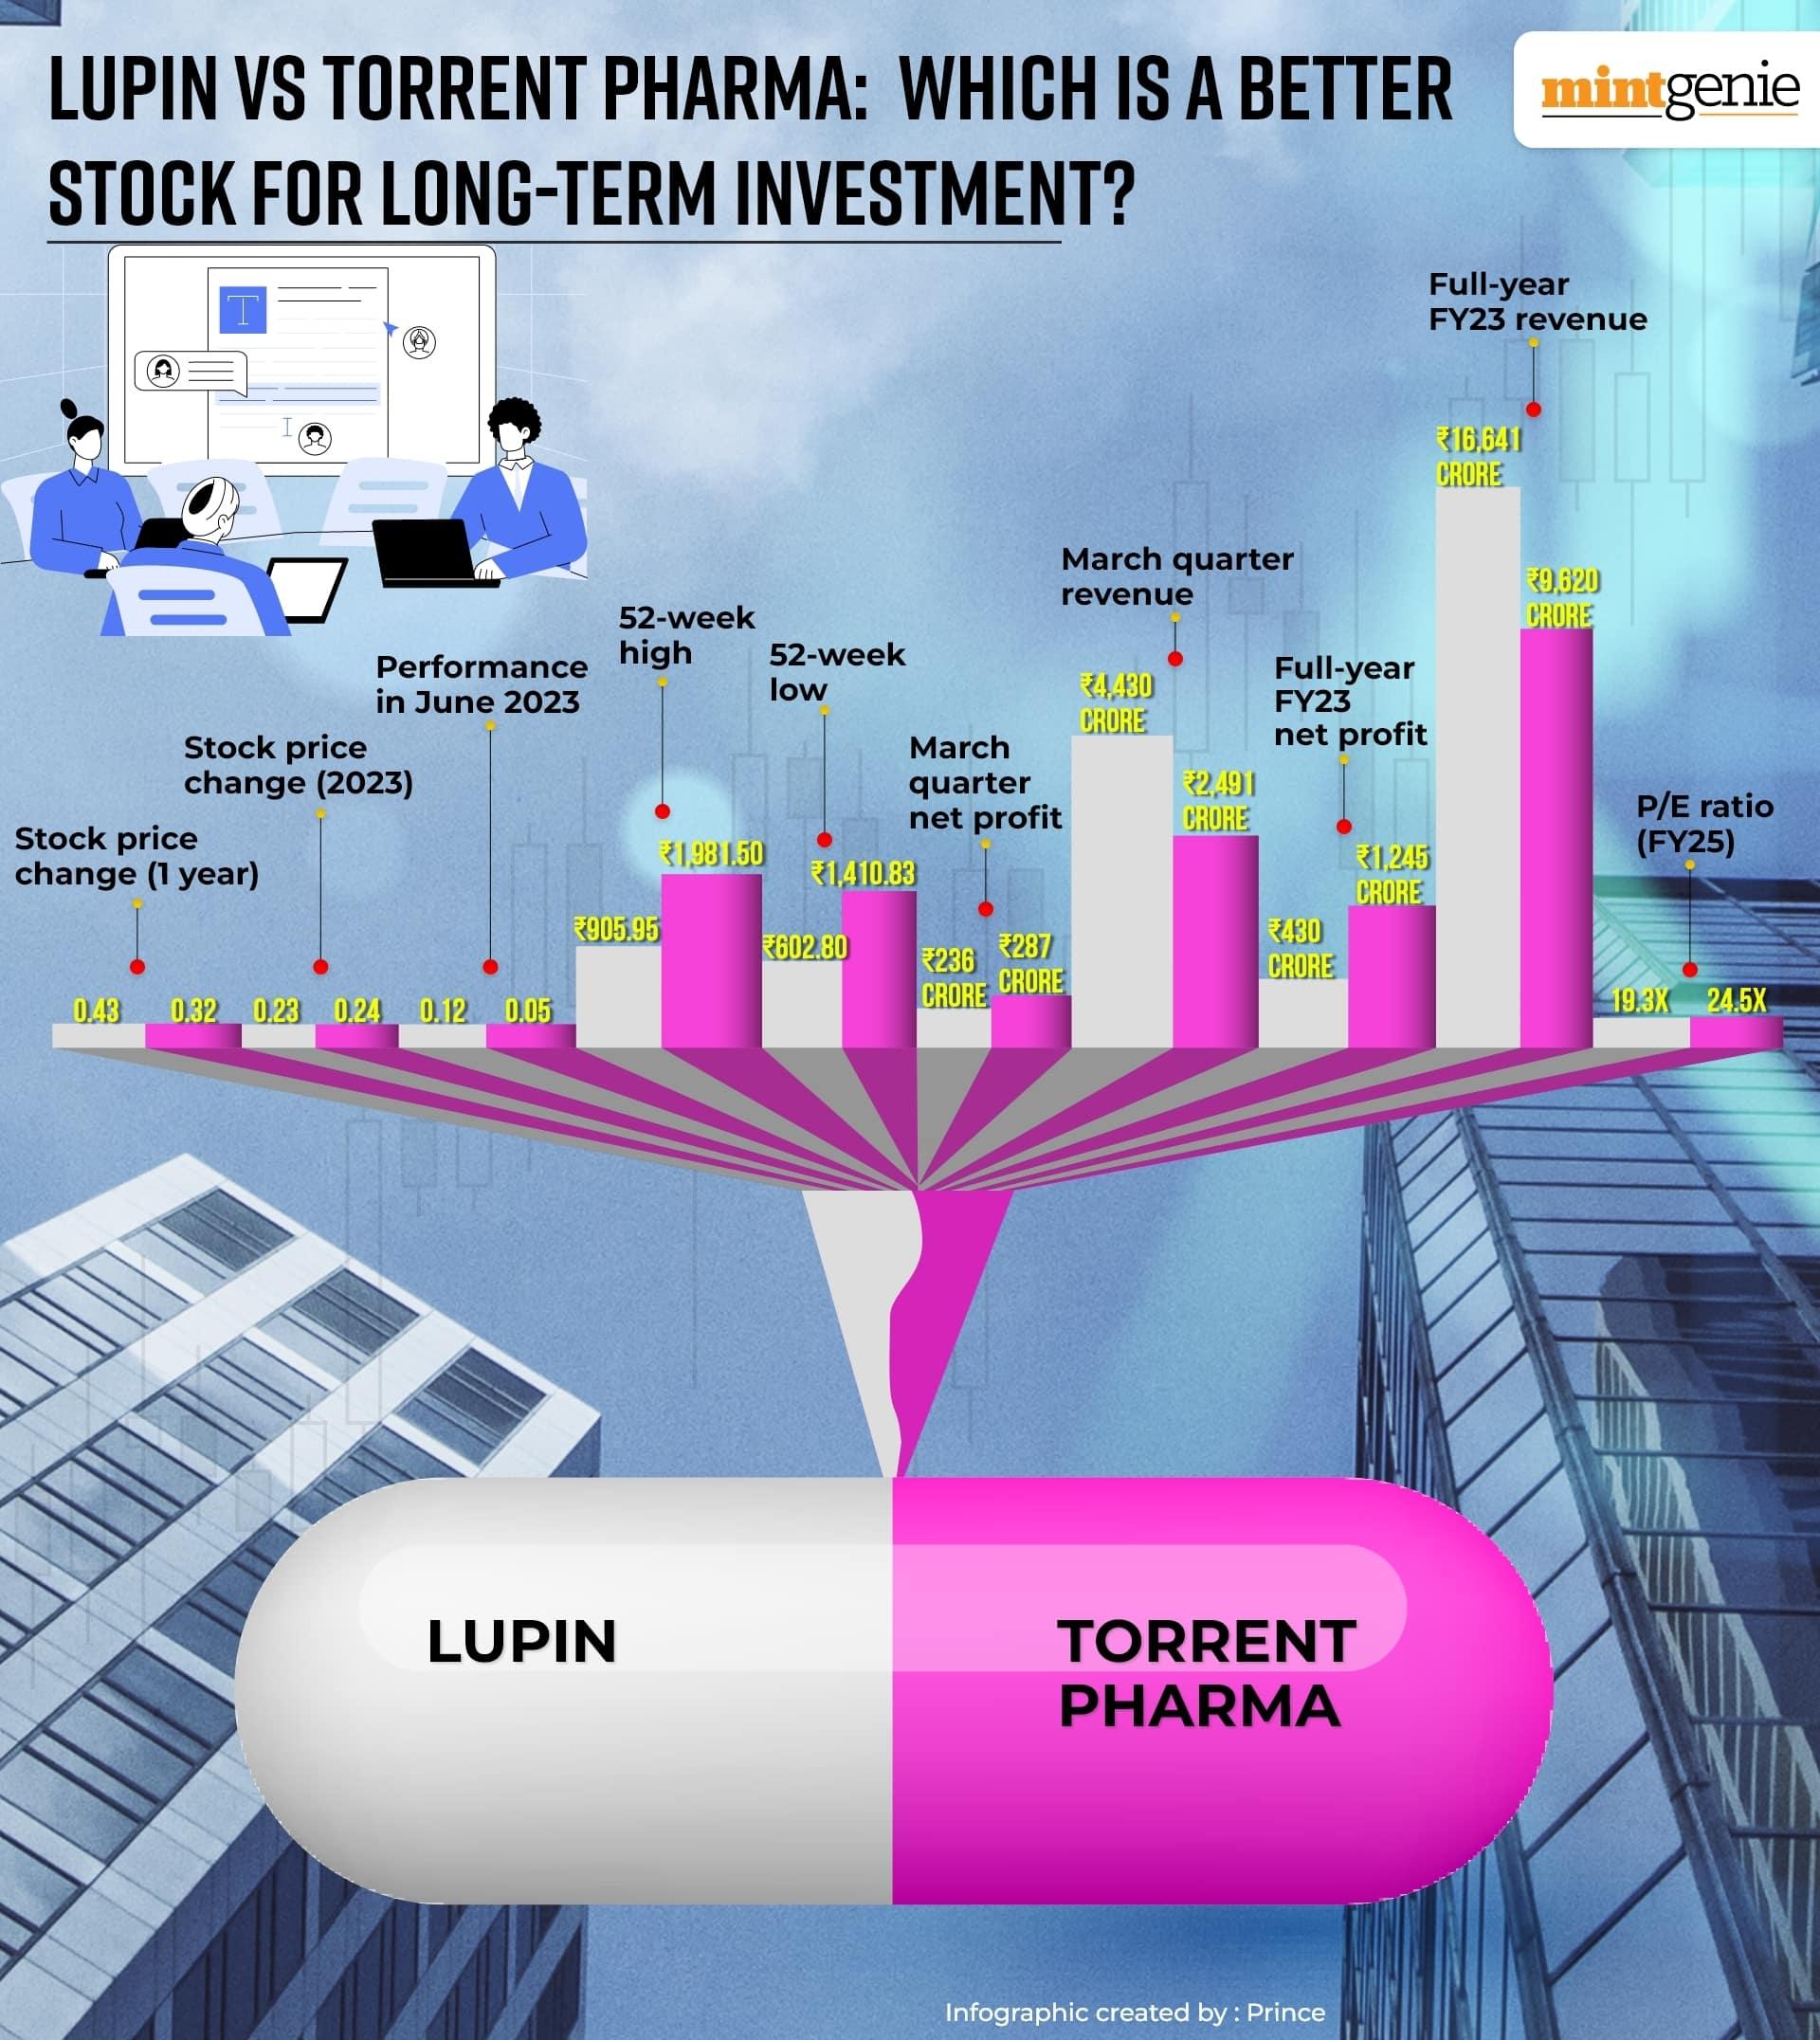 Lupin vs Torrent Pharma: Which is a better stock for long-term investment?